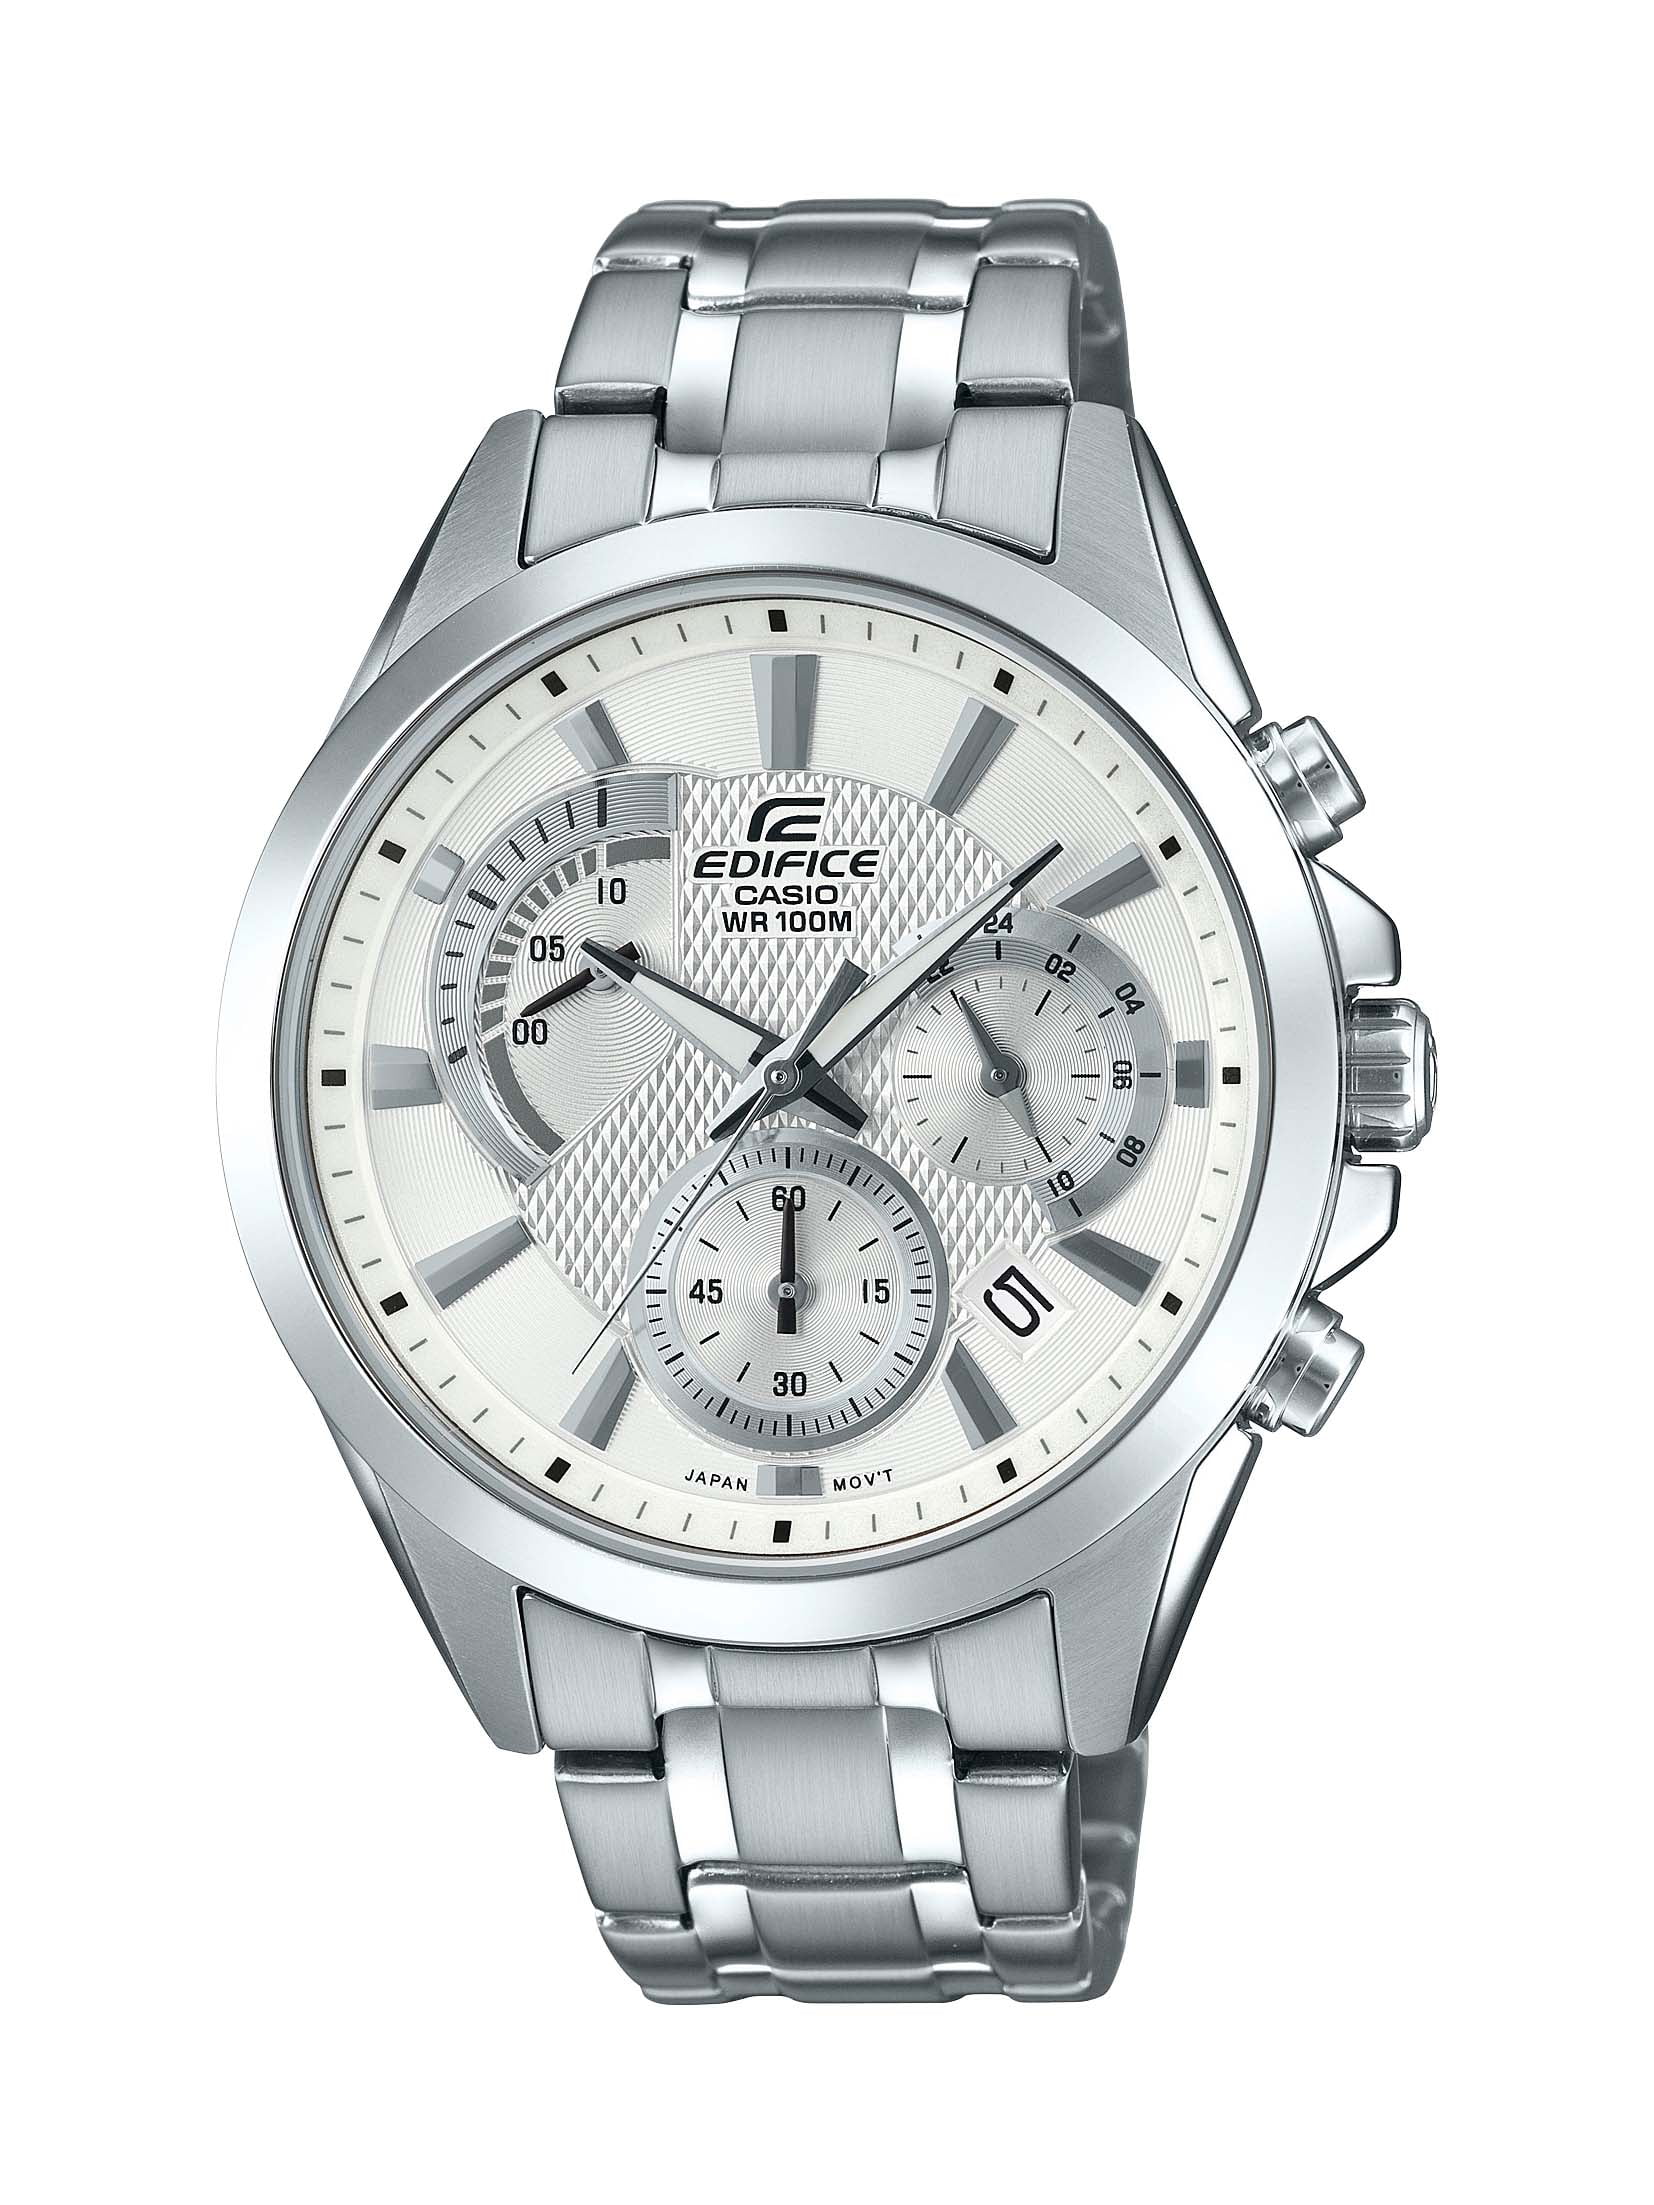 Stainless Watch, Silver Steel Men\'s Chronograph Casio Edifice Dial EFV-580D-7AVUDF